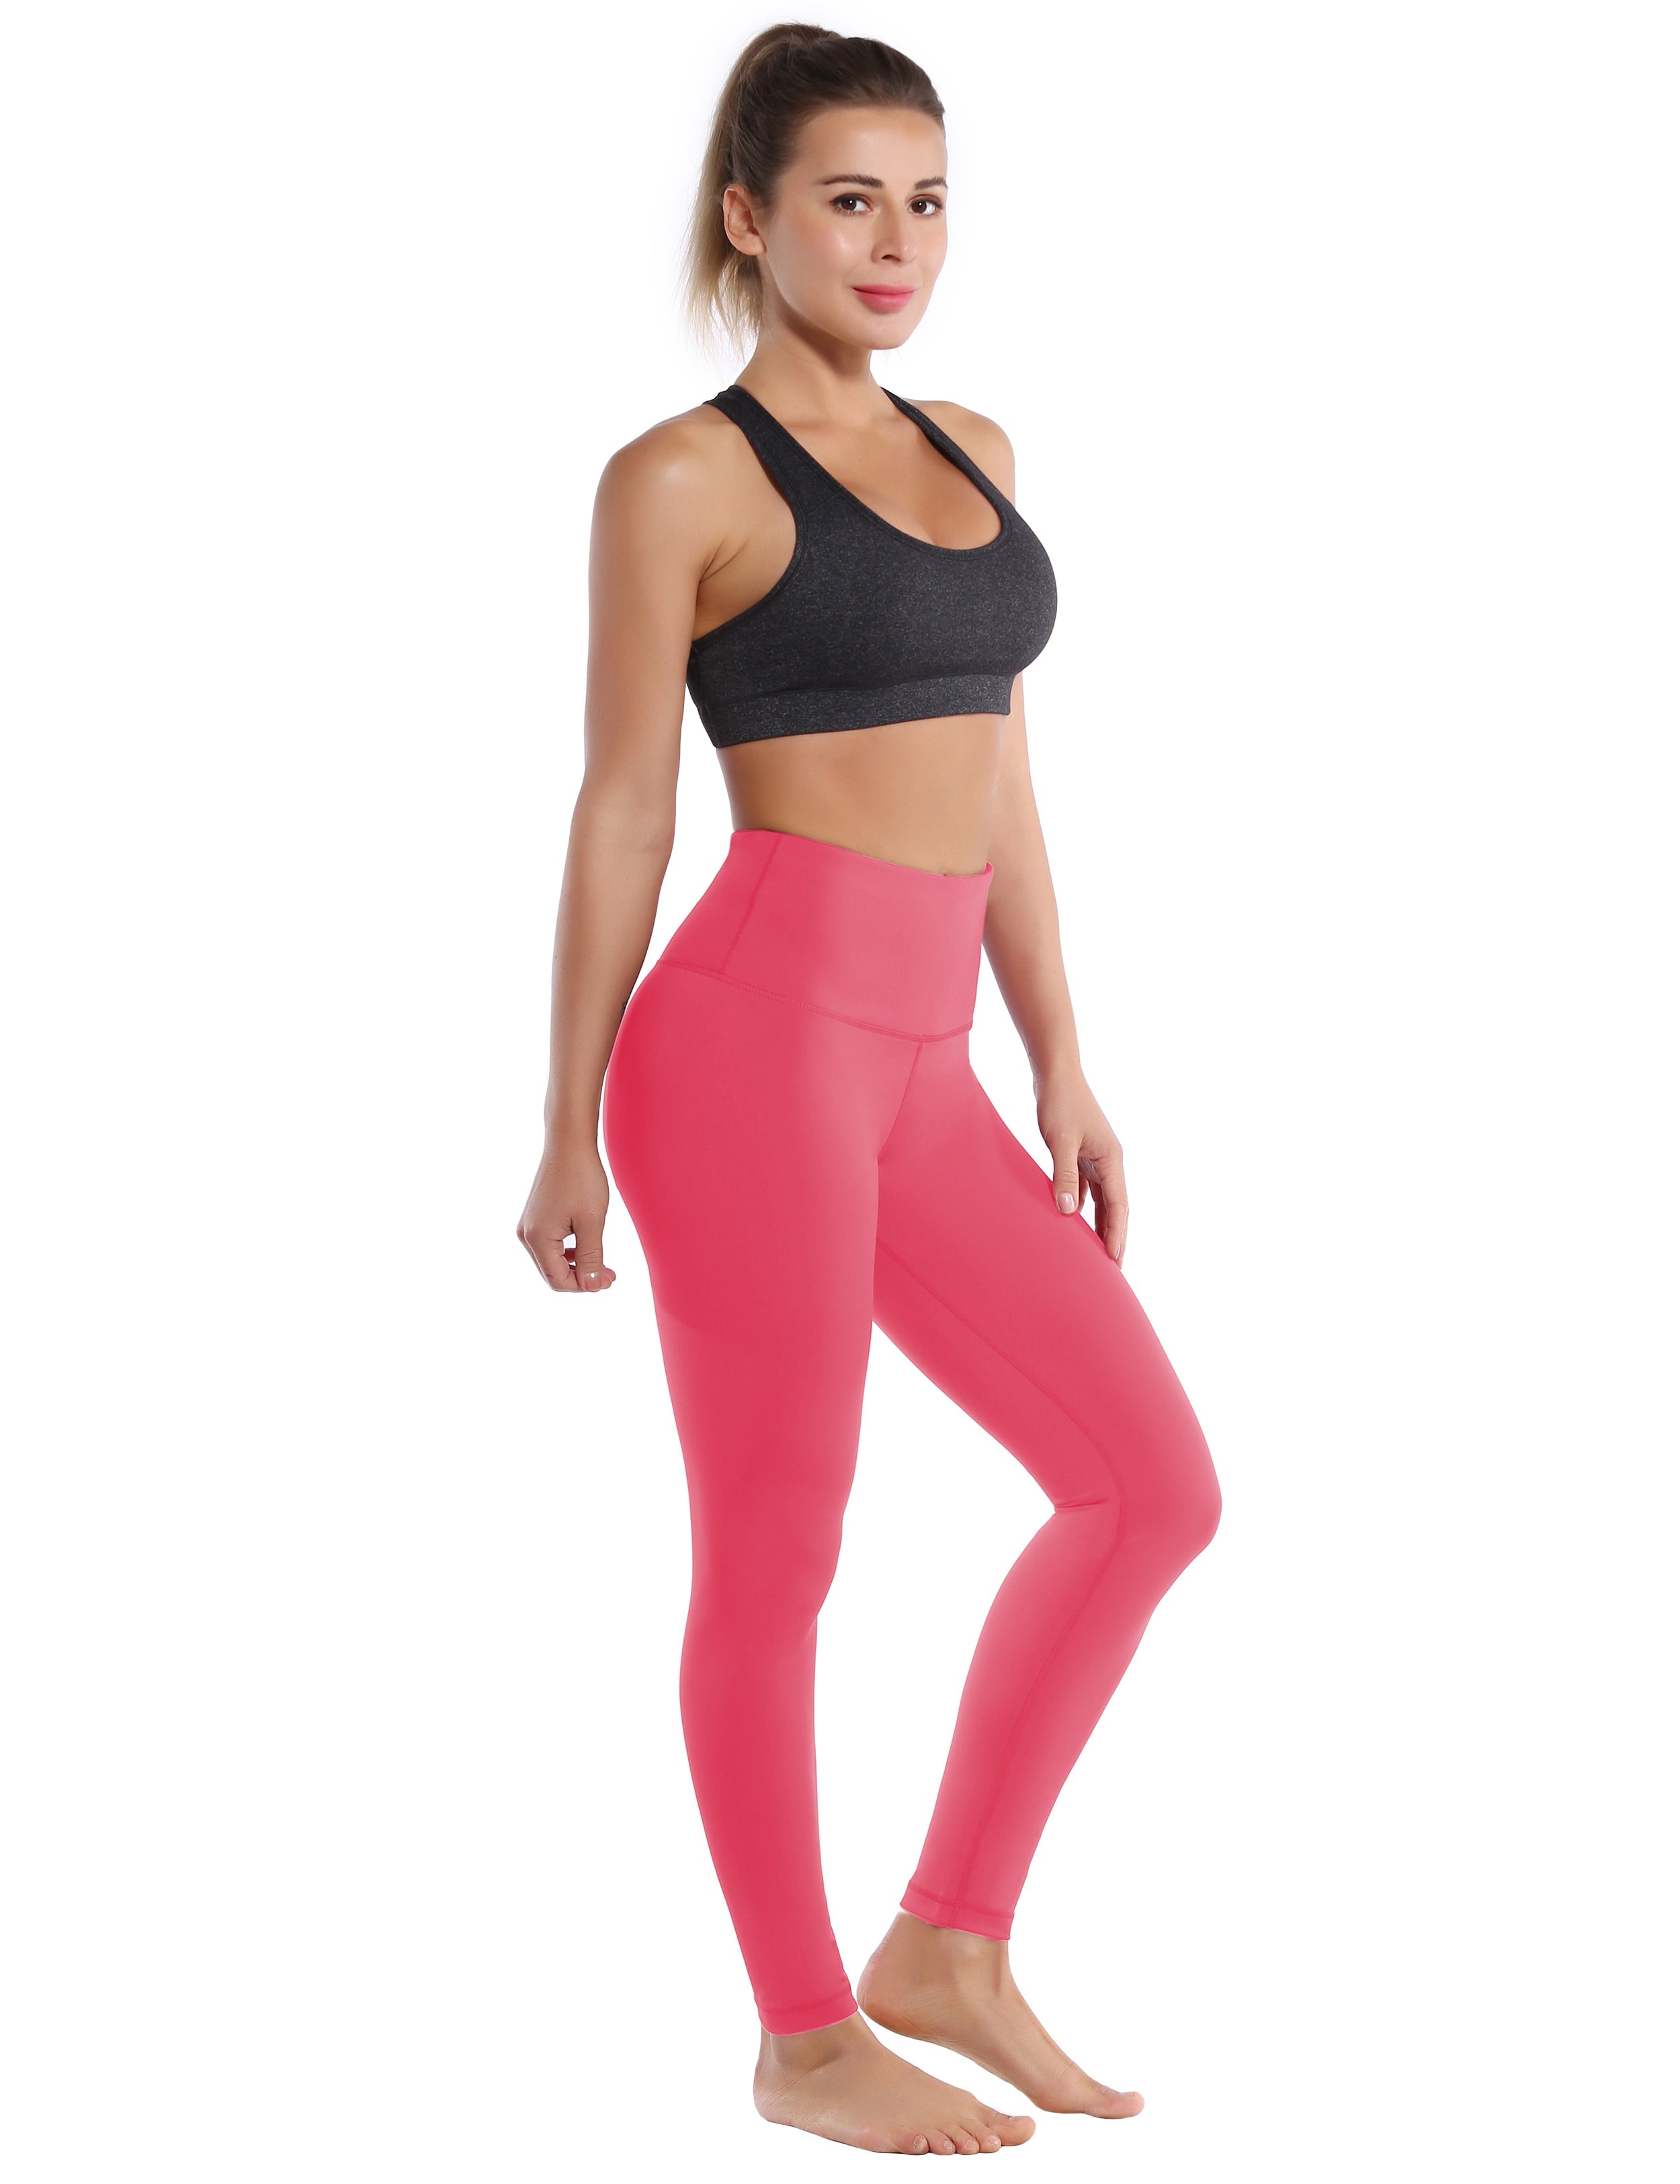 High Waist Biking Pants rosecoral 75%Nylon/25%Spandex Fabric doesn't attract lint easily 4-way stretch No see-through Moisture-wicking Tummy control Inner pocket Four lengths